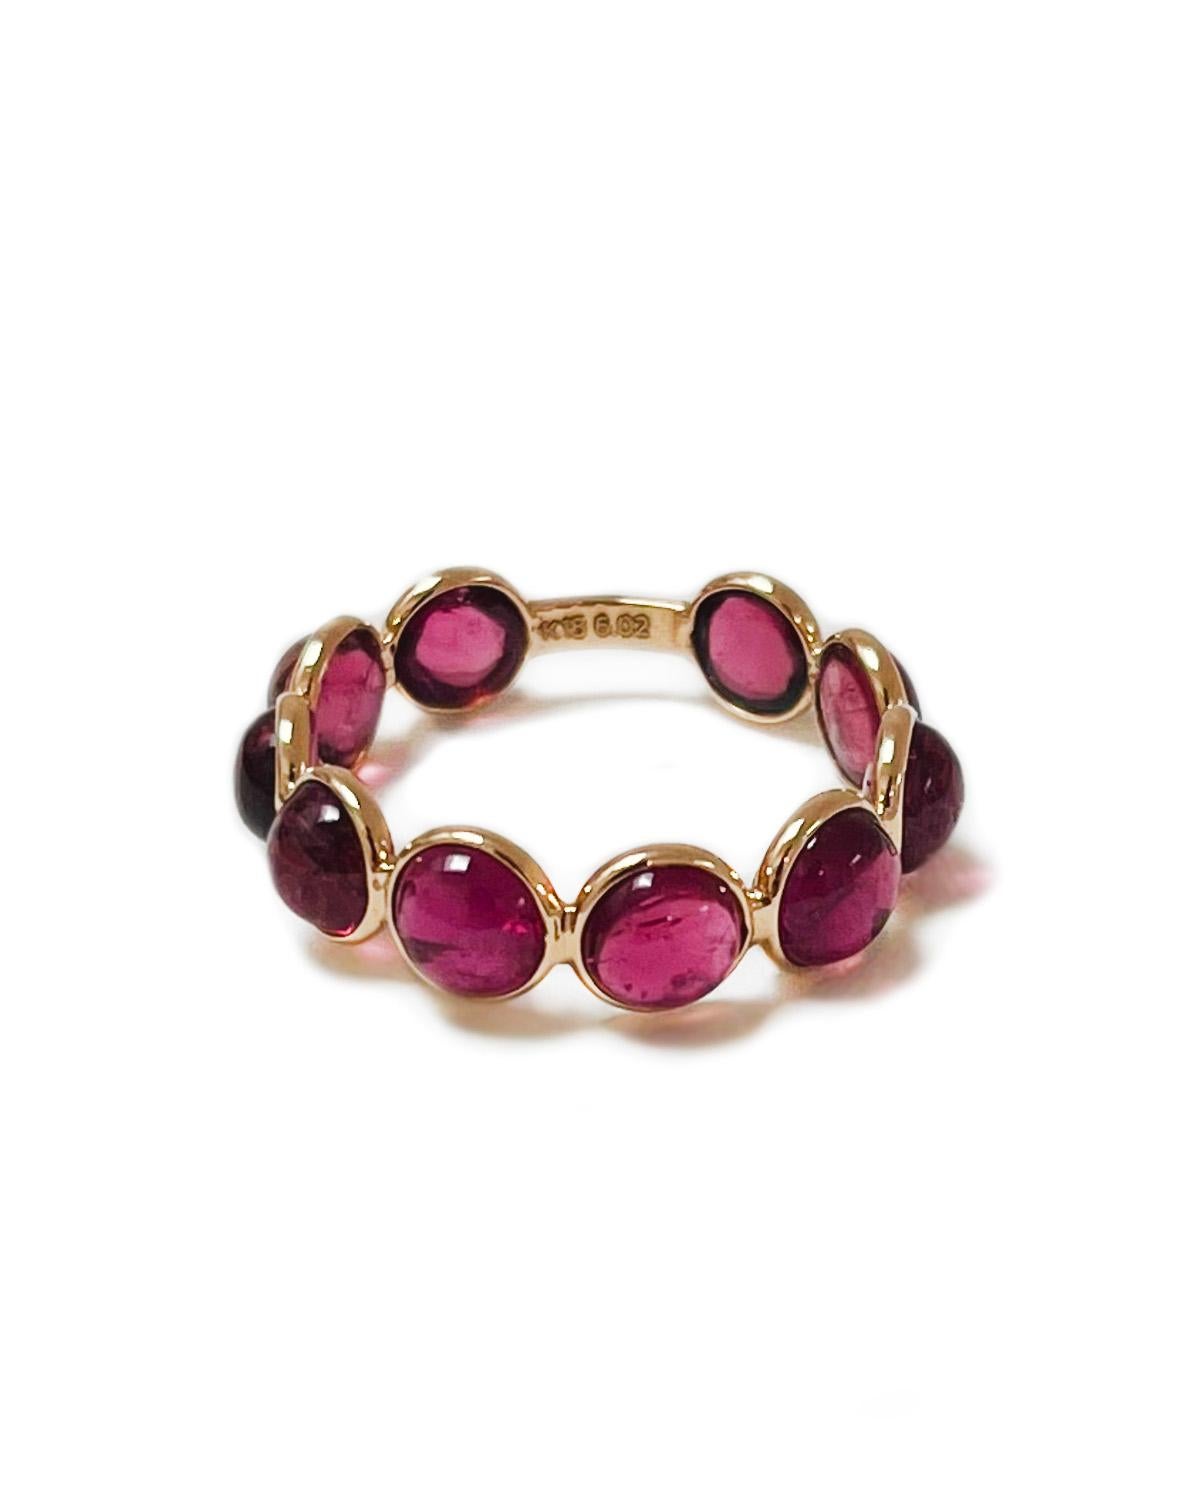 Aura Ring in Round-Cut Rubellite and 18k Yellow Gold In Excellent Condition For Sale In Oakland, CA